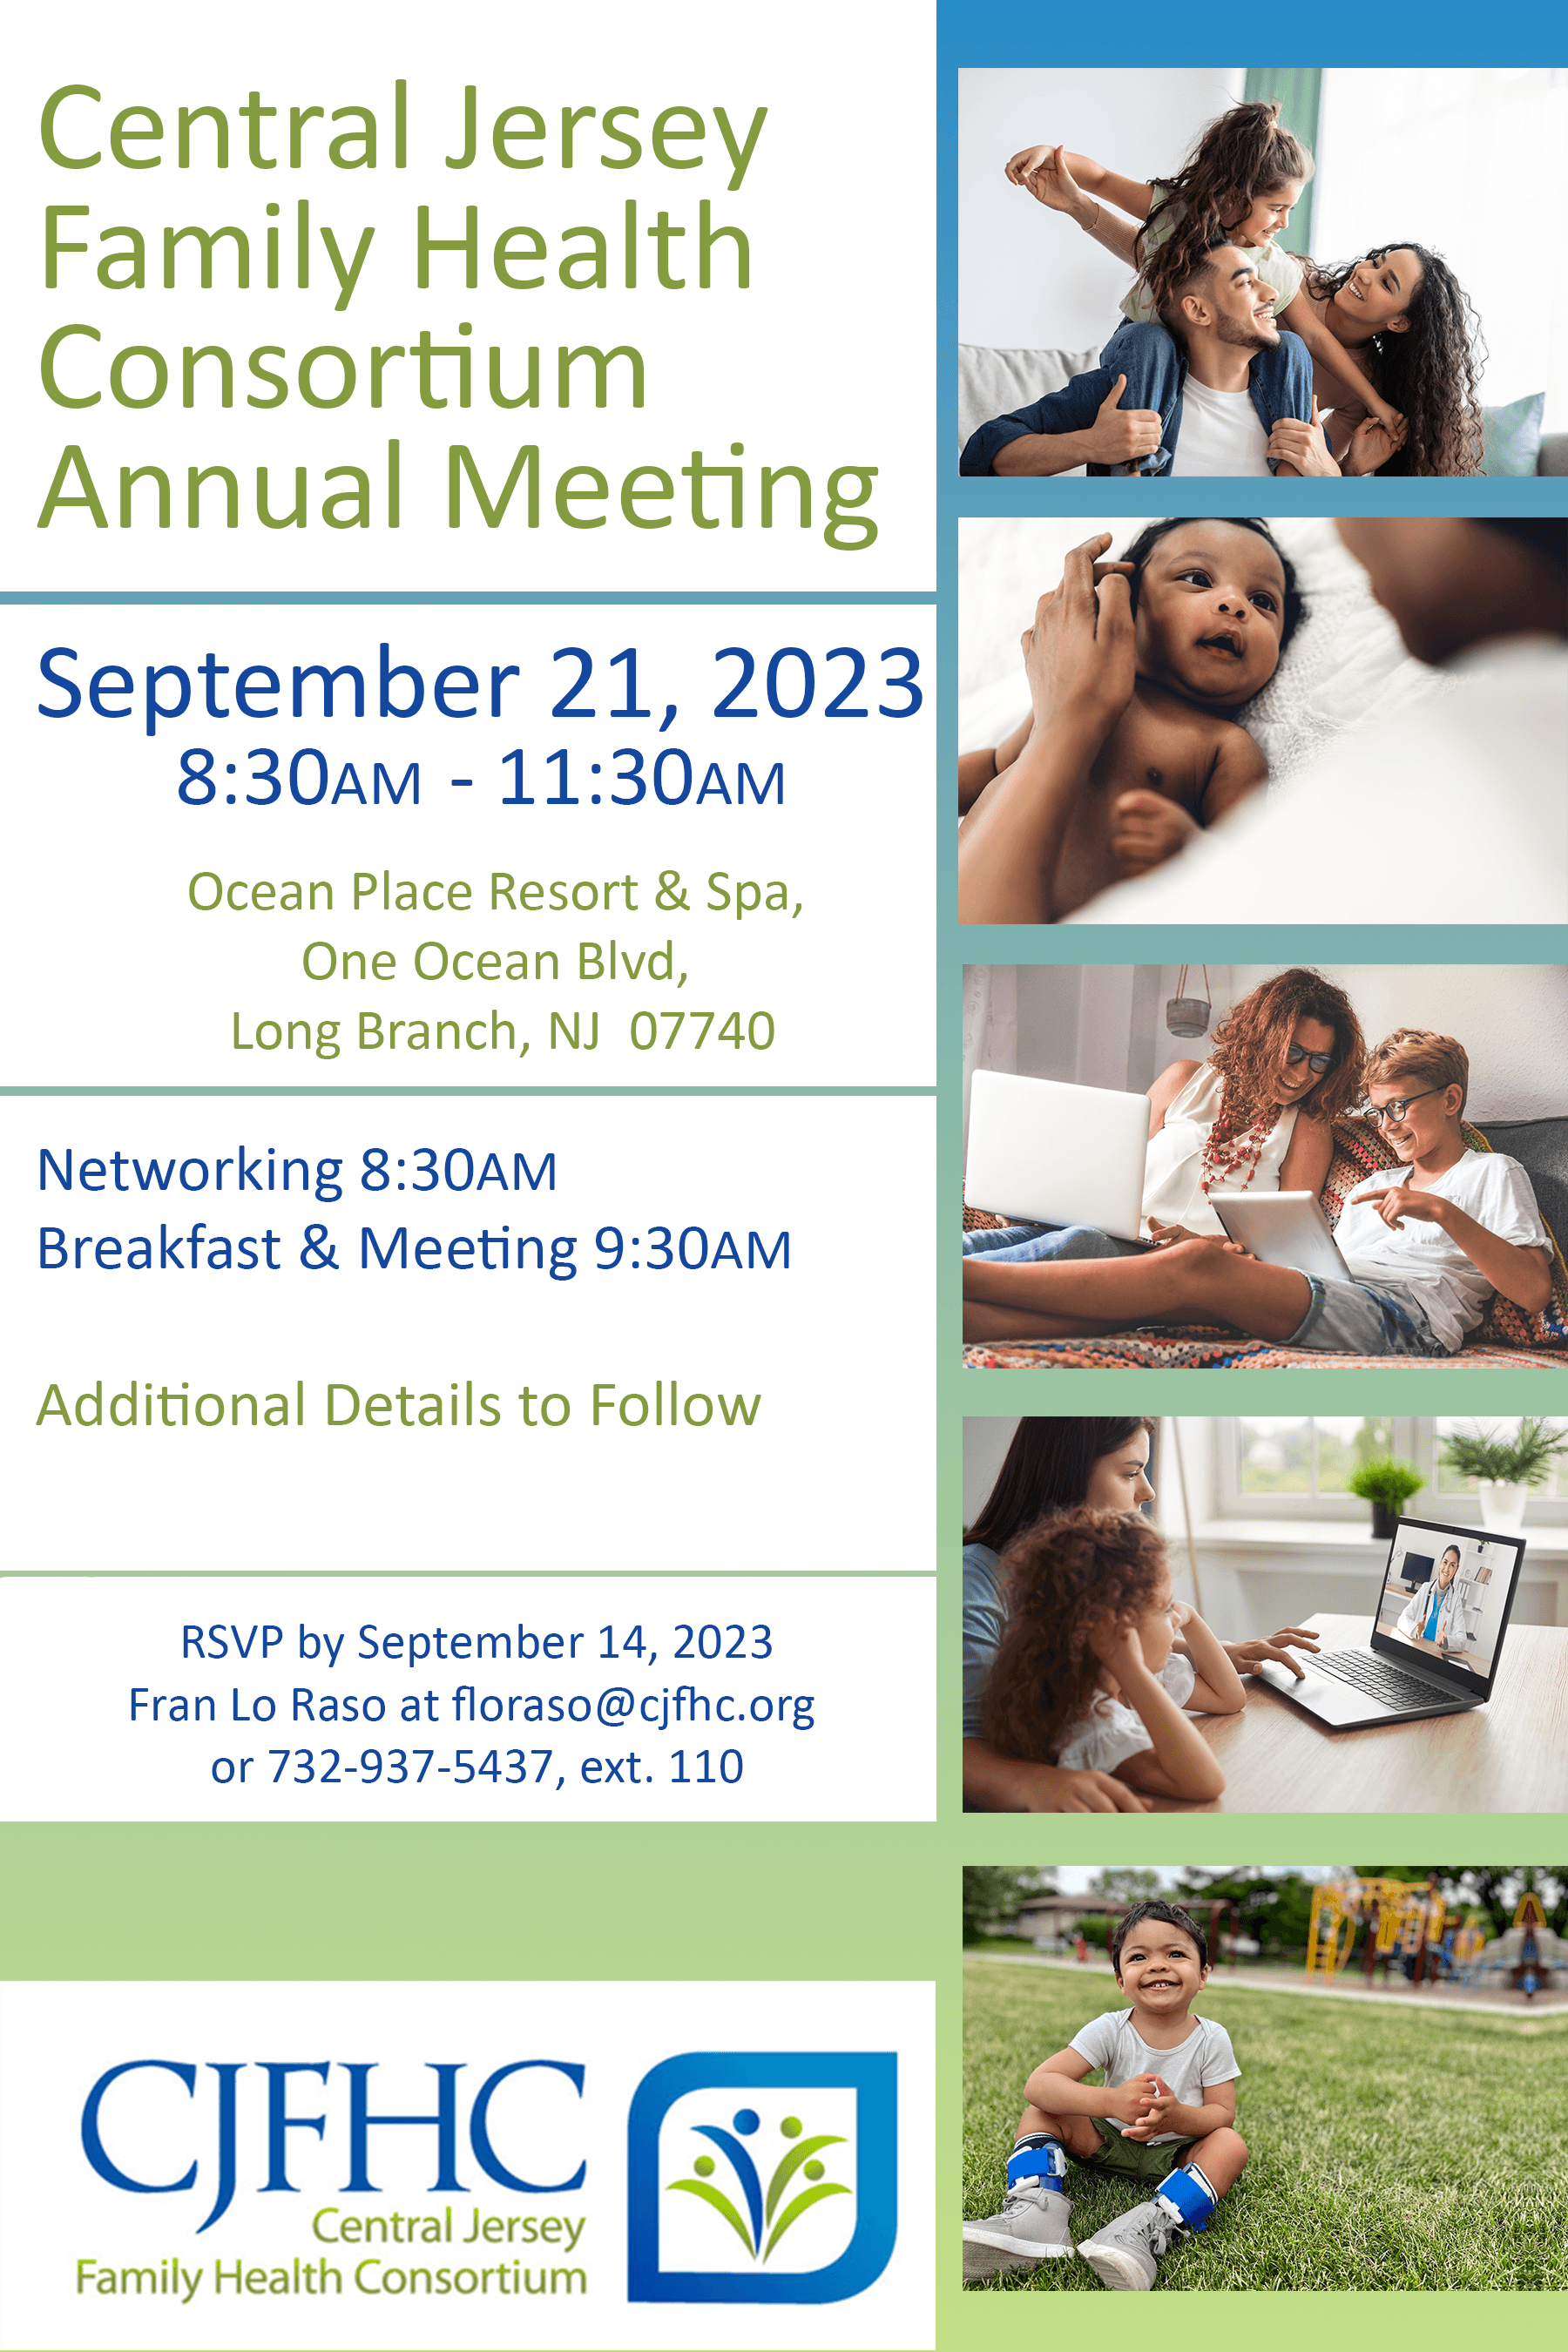 CJFHC Celebrates Its Annual Meeting of Members - September 21, 2023